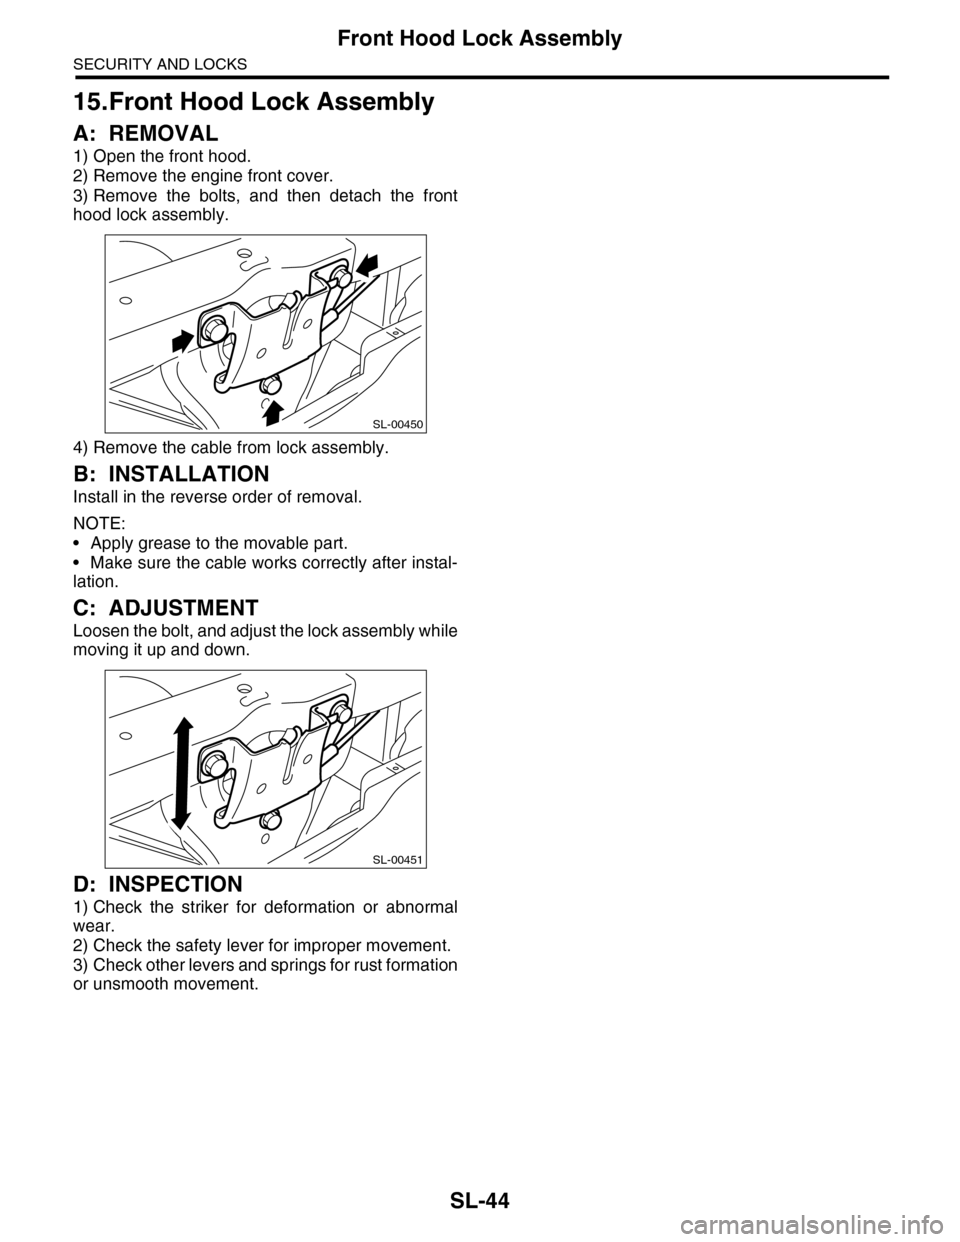 SUBARU TRIBECA 2009 1.G Service Workshop Manual SL-44
Front Hood Lock Assembly
SECURITY AND LOCKS
15.Front Hood Lock Assembly
A: REMOVAL
1) Open the front hood.
2) Remove the engine front cover.
3) Remove  the  bolts,  and  then  detach  the  front